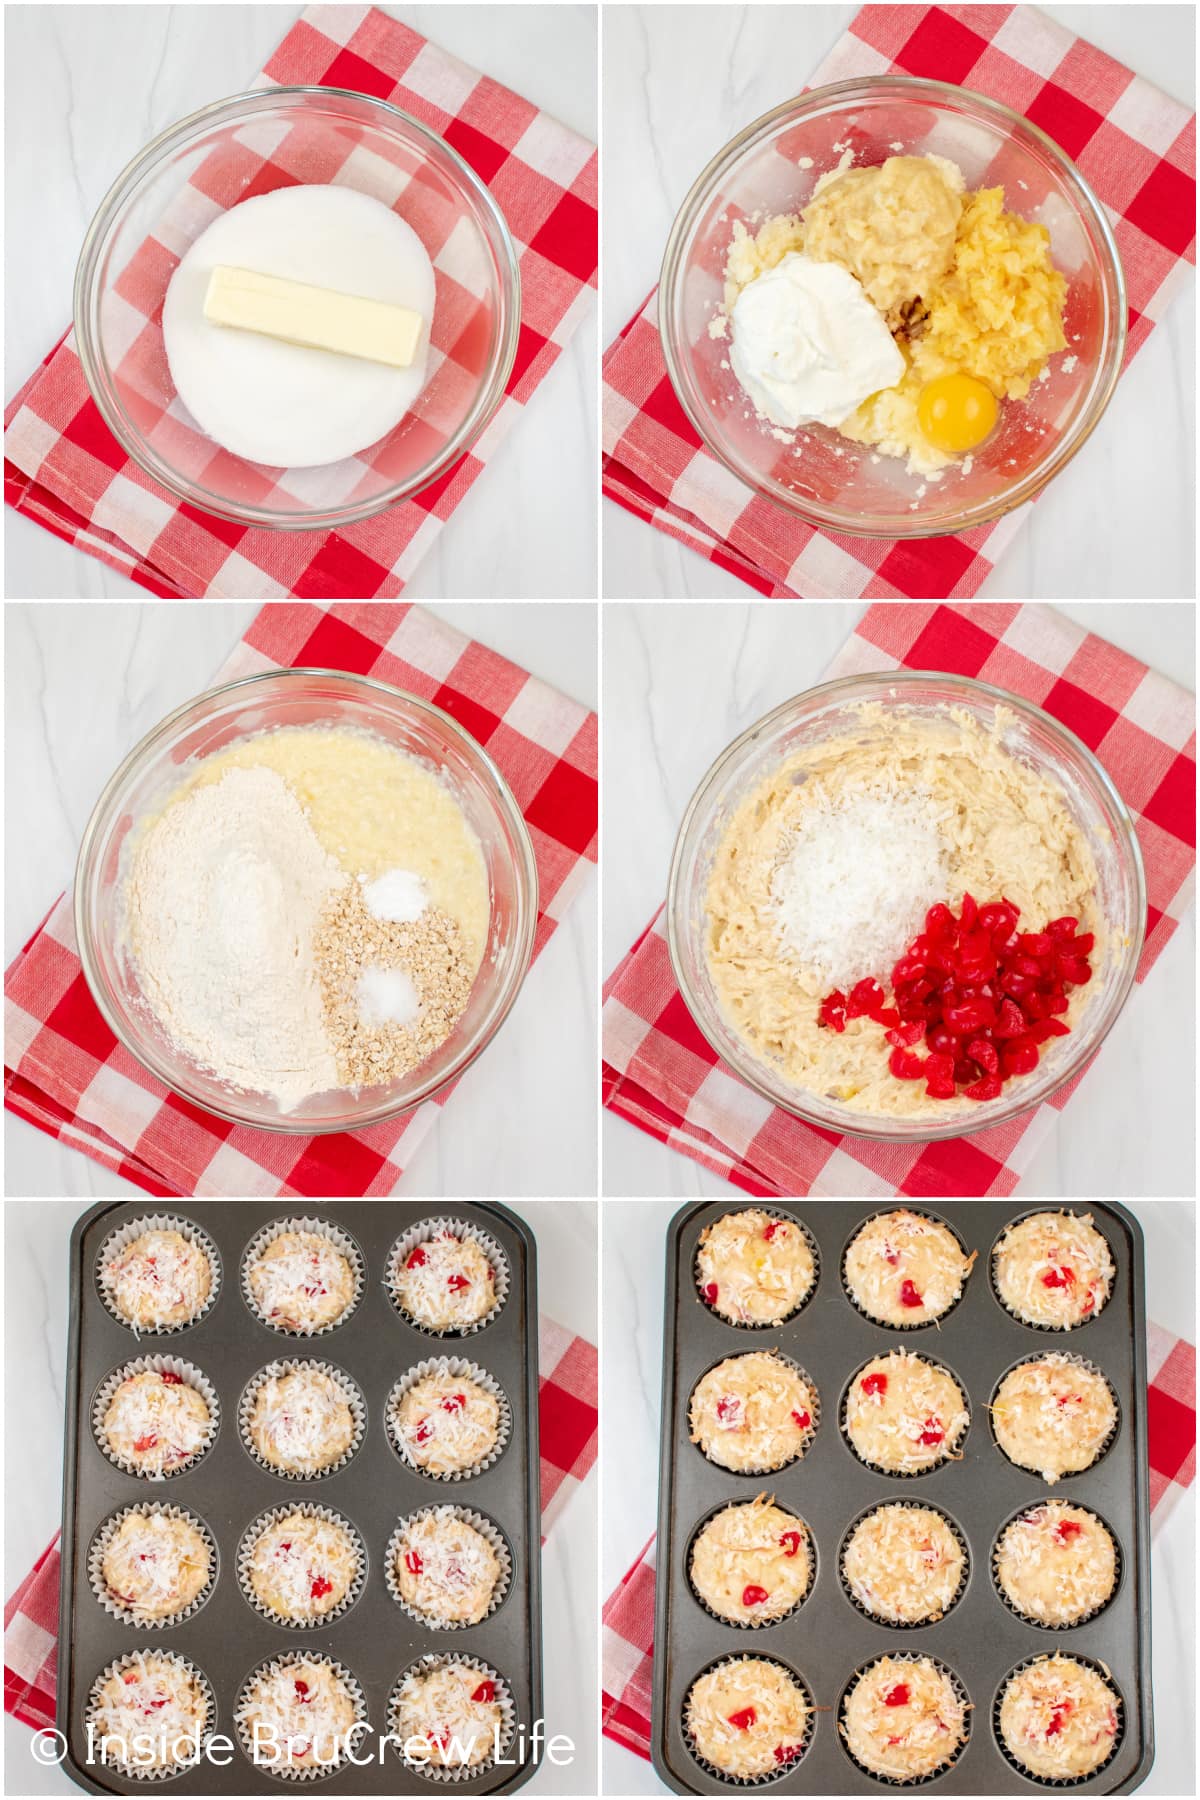 Six pictures collaged together showing how to make tropical muffins.